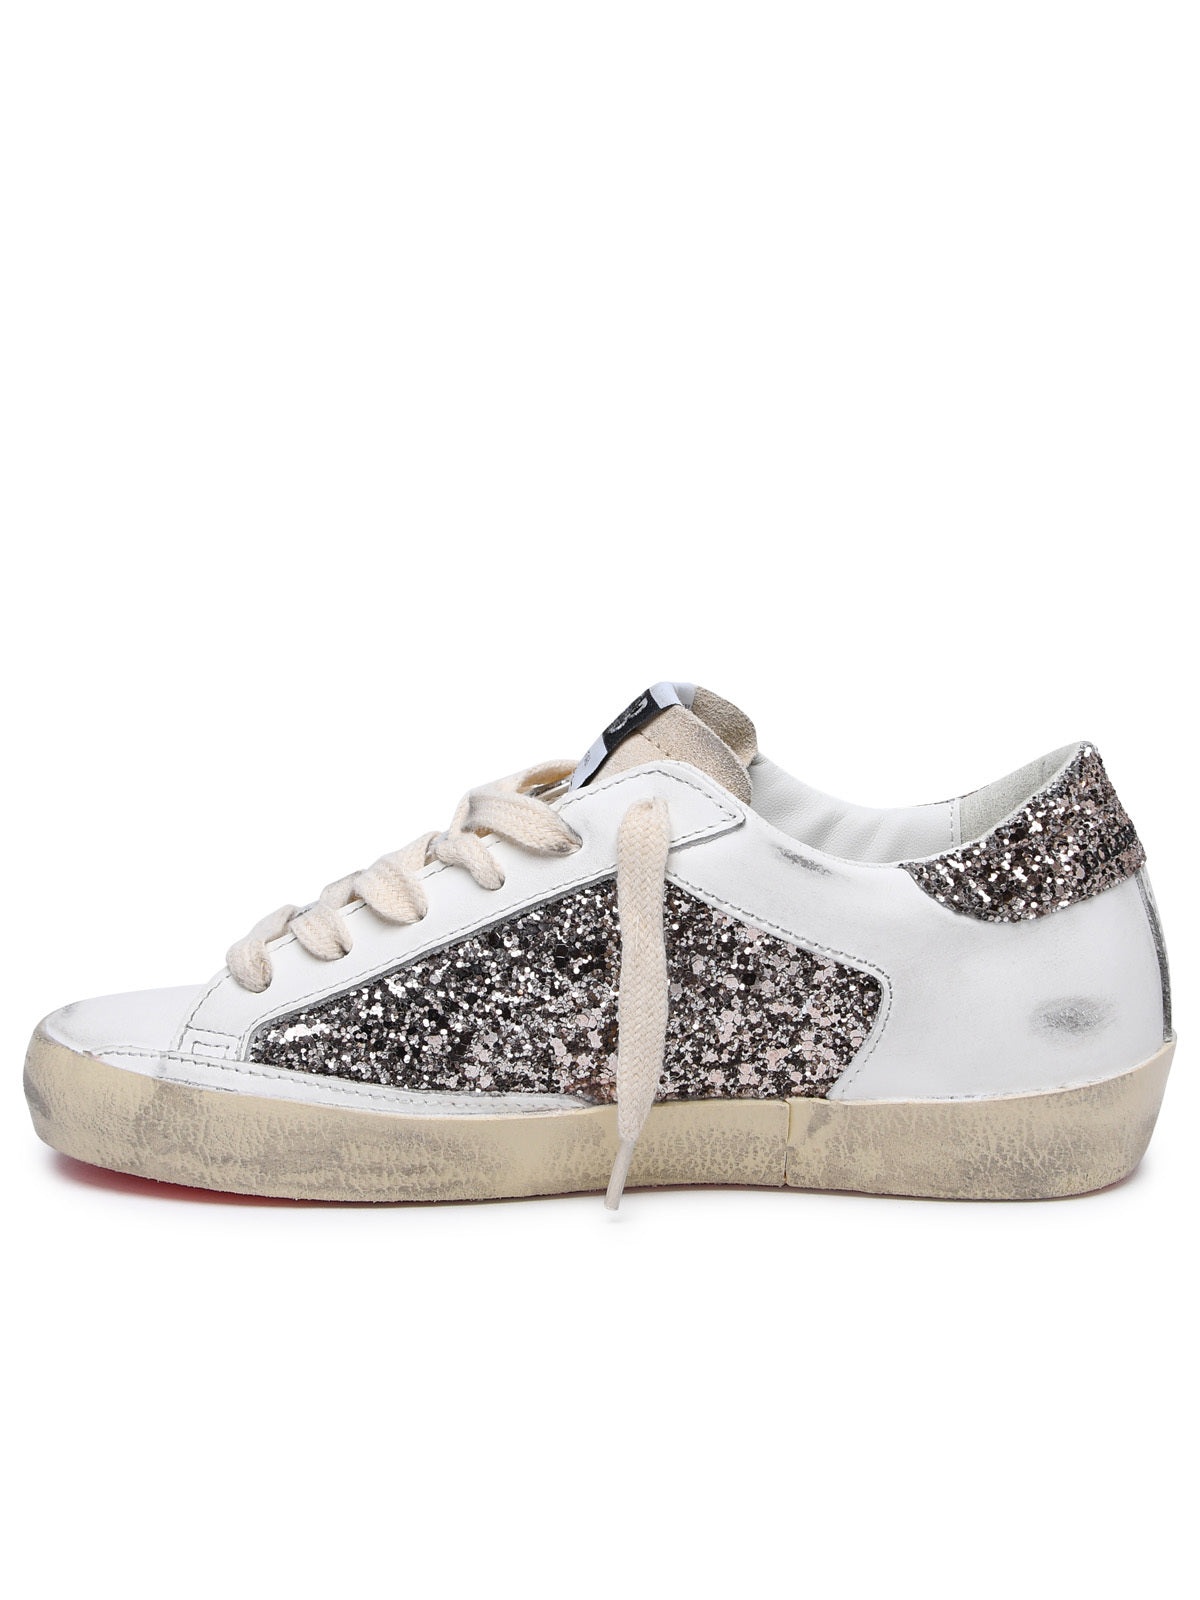 Golden Goose Woman Golden Goose 'Super-Star' White Leather Sneakers - 3